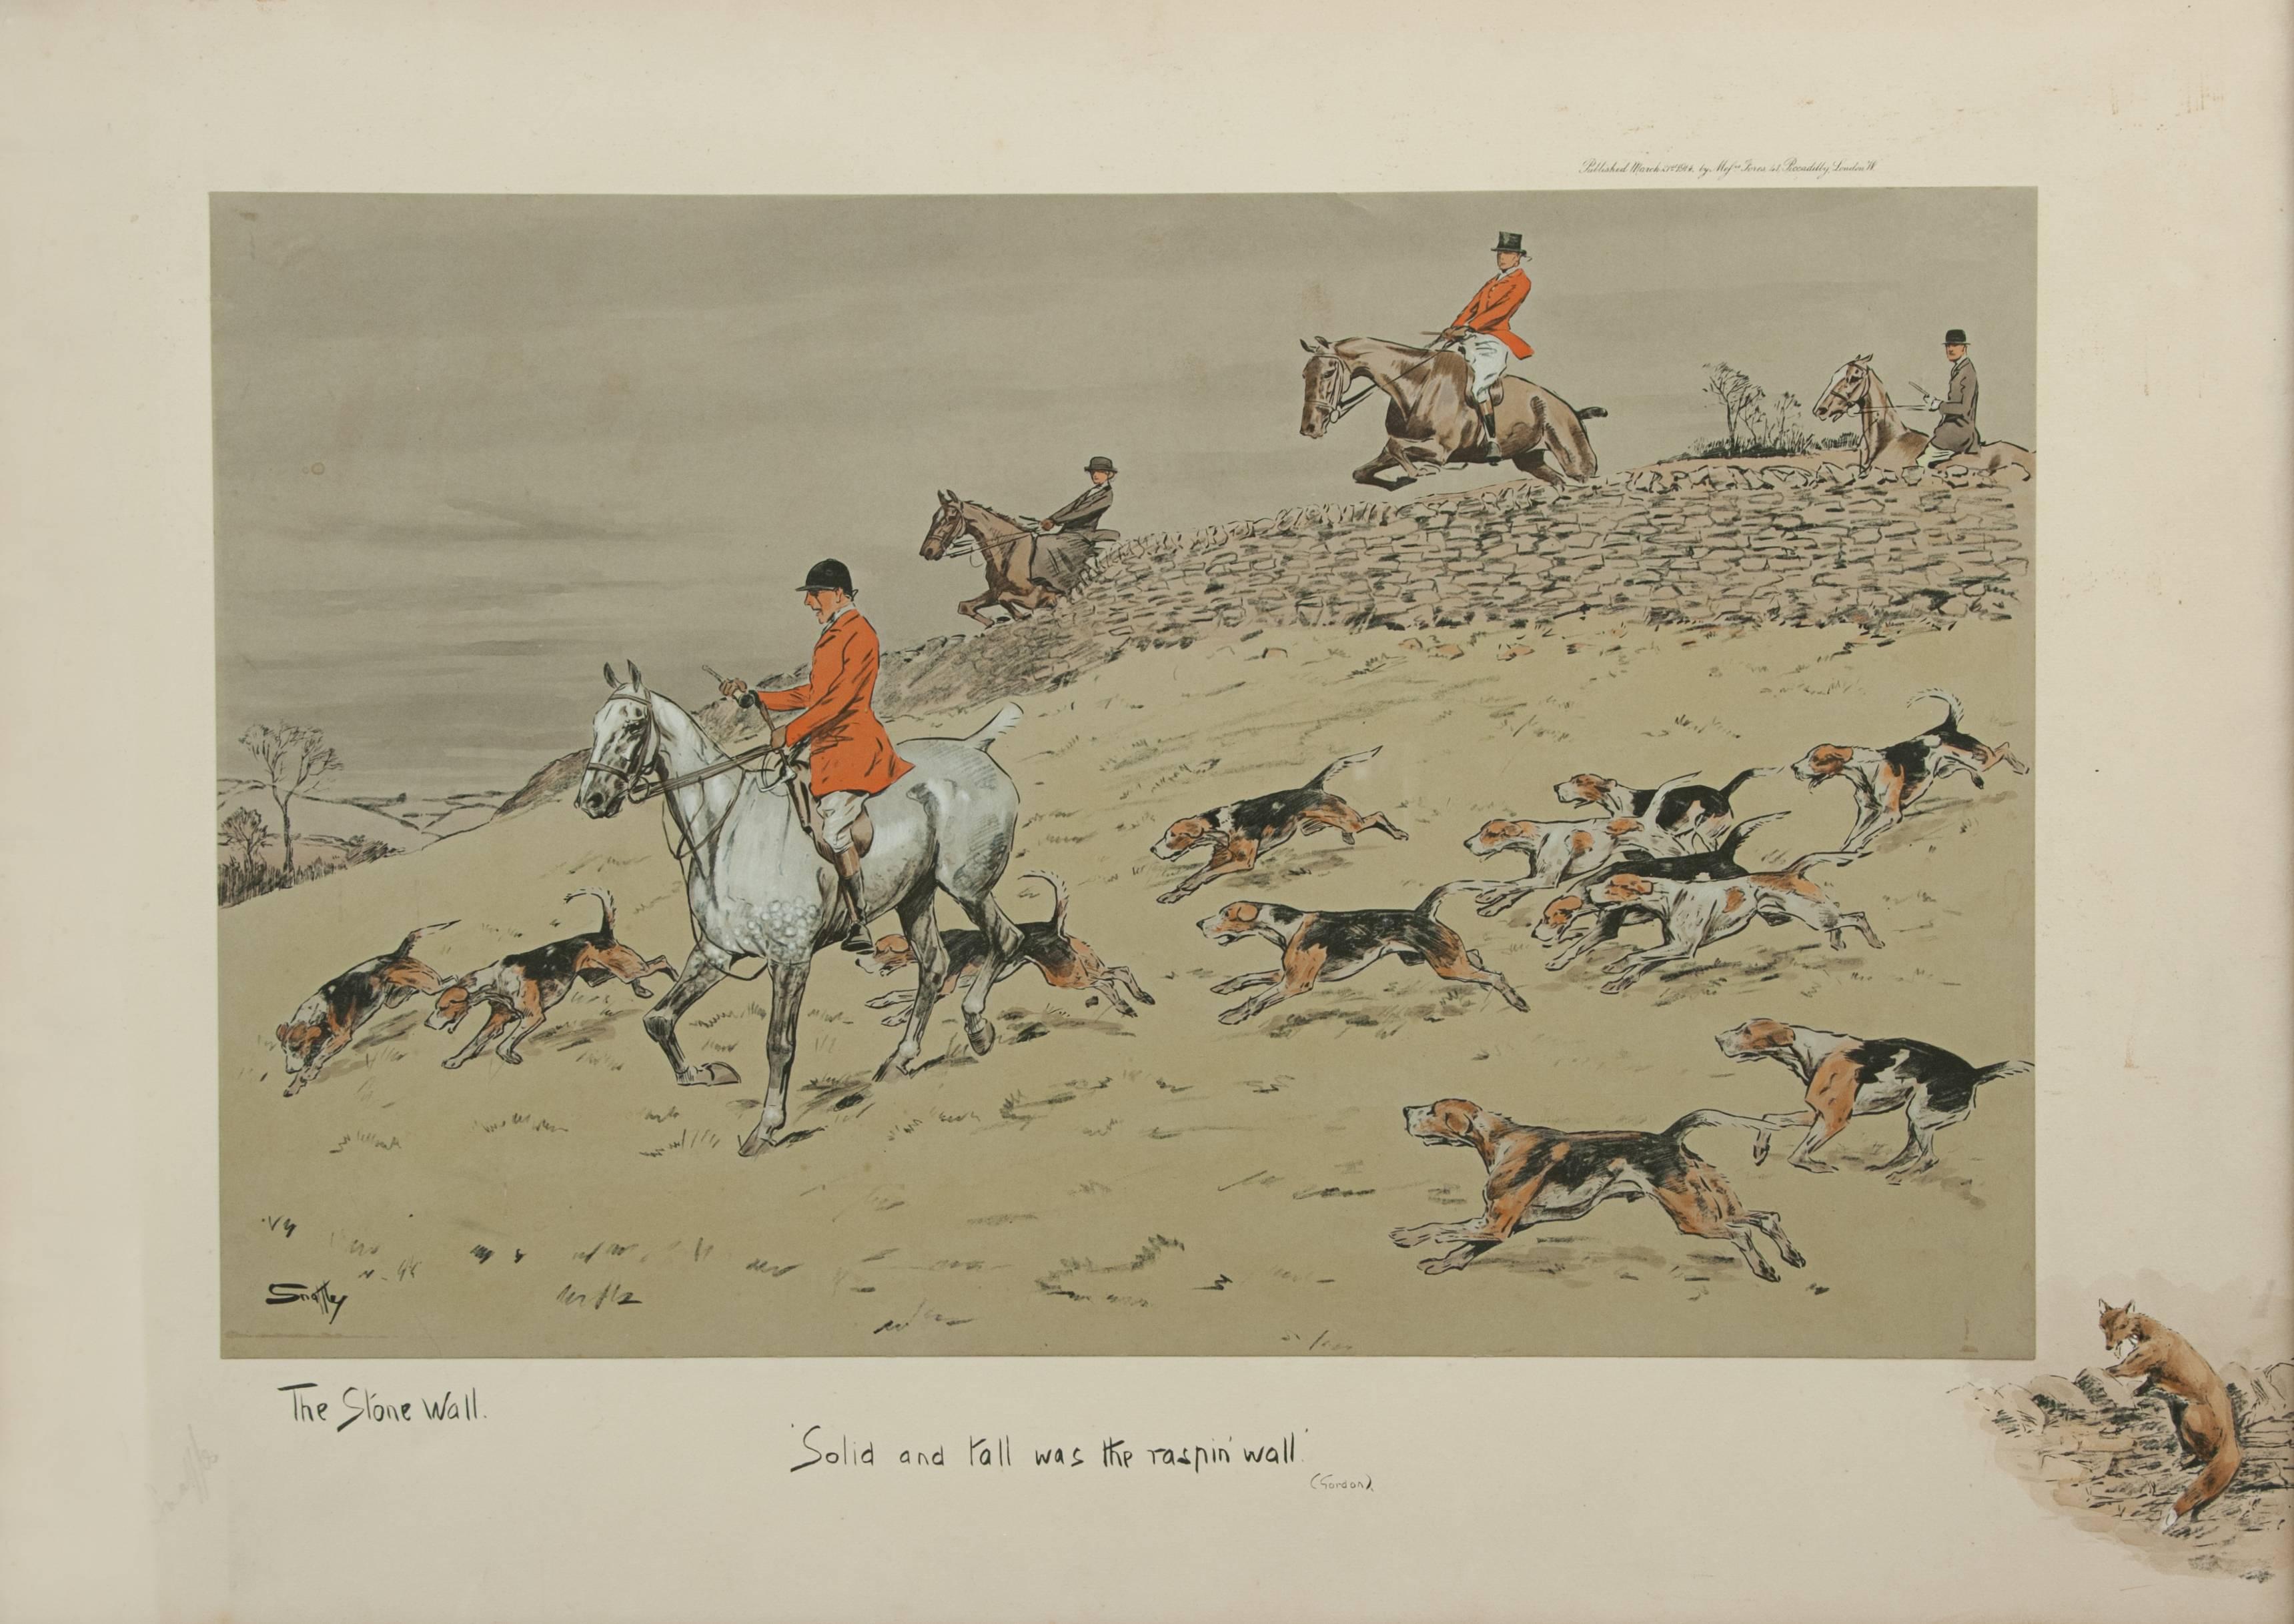 The stone wall by Snaffles
A good signed snaffles hunting print 'The Stone Wall'. The snaffles hand coloured lithograph depicts a huntsman with the hounds in the foreground, in the background there is a wall being jumped by two riders and the